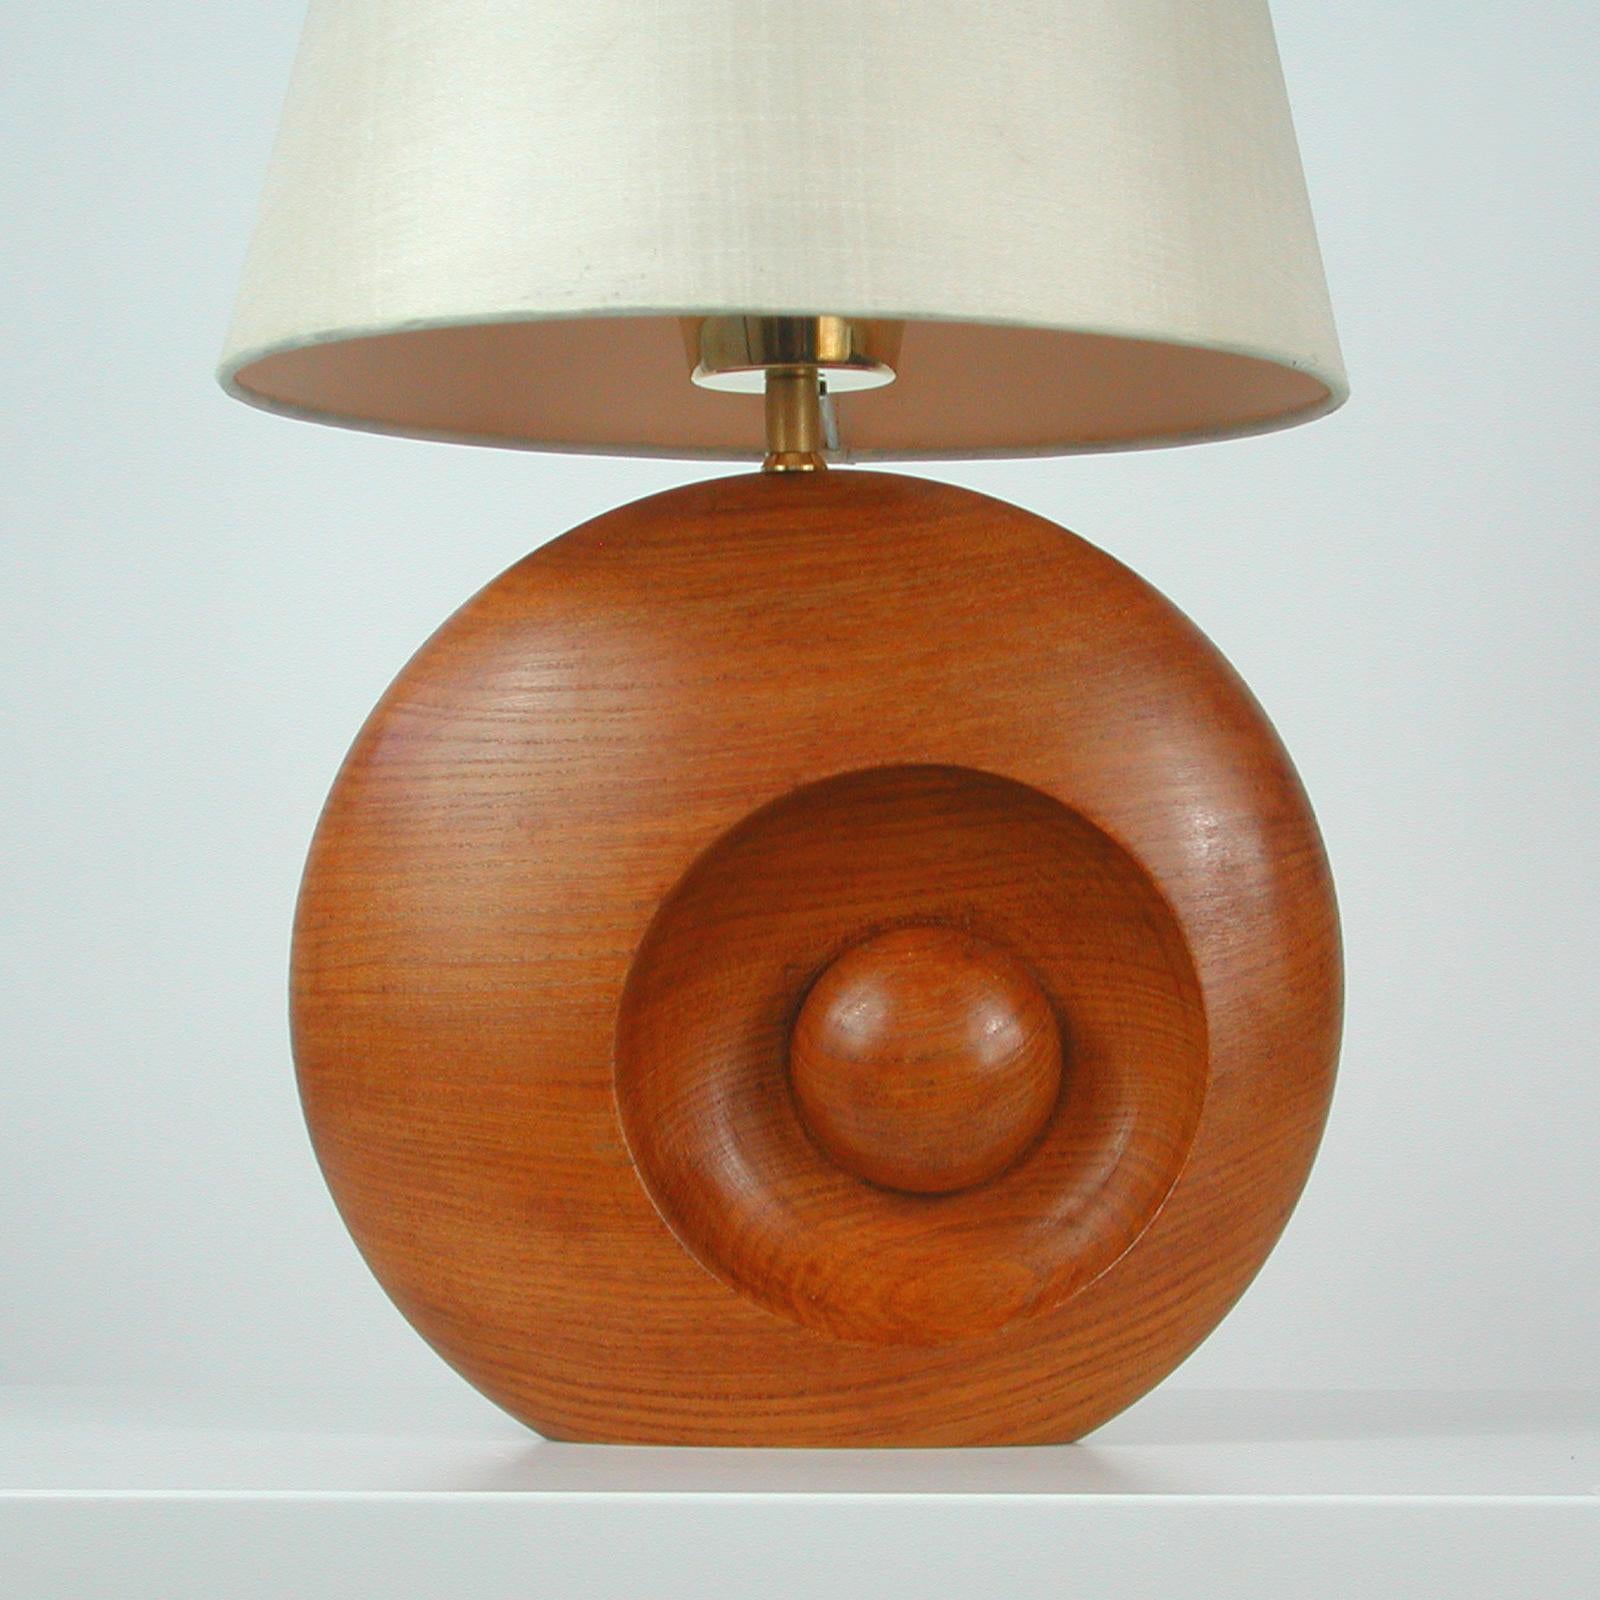 This awesome table lamp was designed and manufactured in Sweden in the 1960s. It features a round teak base with brass bulb holder.

Overall condition is very good. The lamp has been rewired with new fabric cord and is ready for use in any country